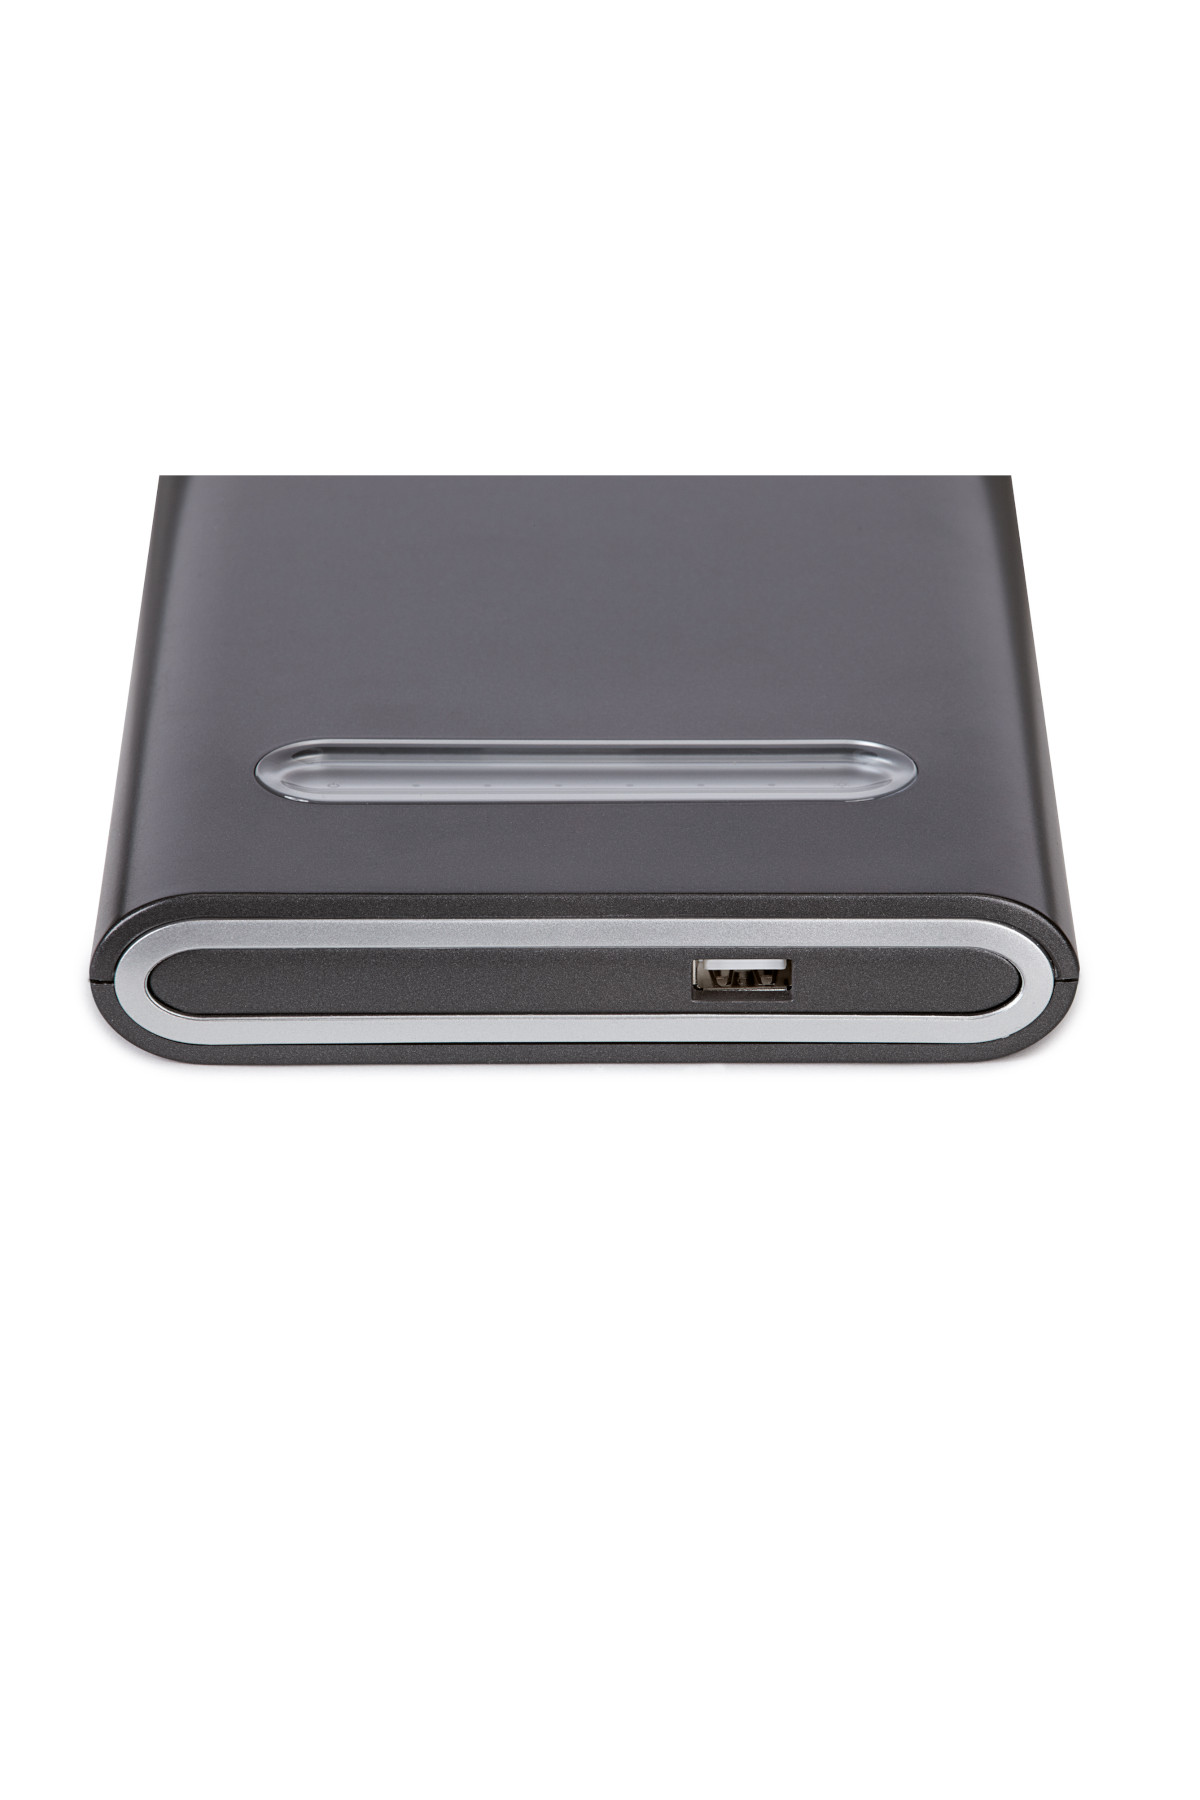 LED-Tischleuchte MAULpure, dimmbar, USB-Port in silber